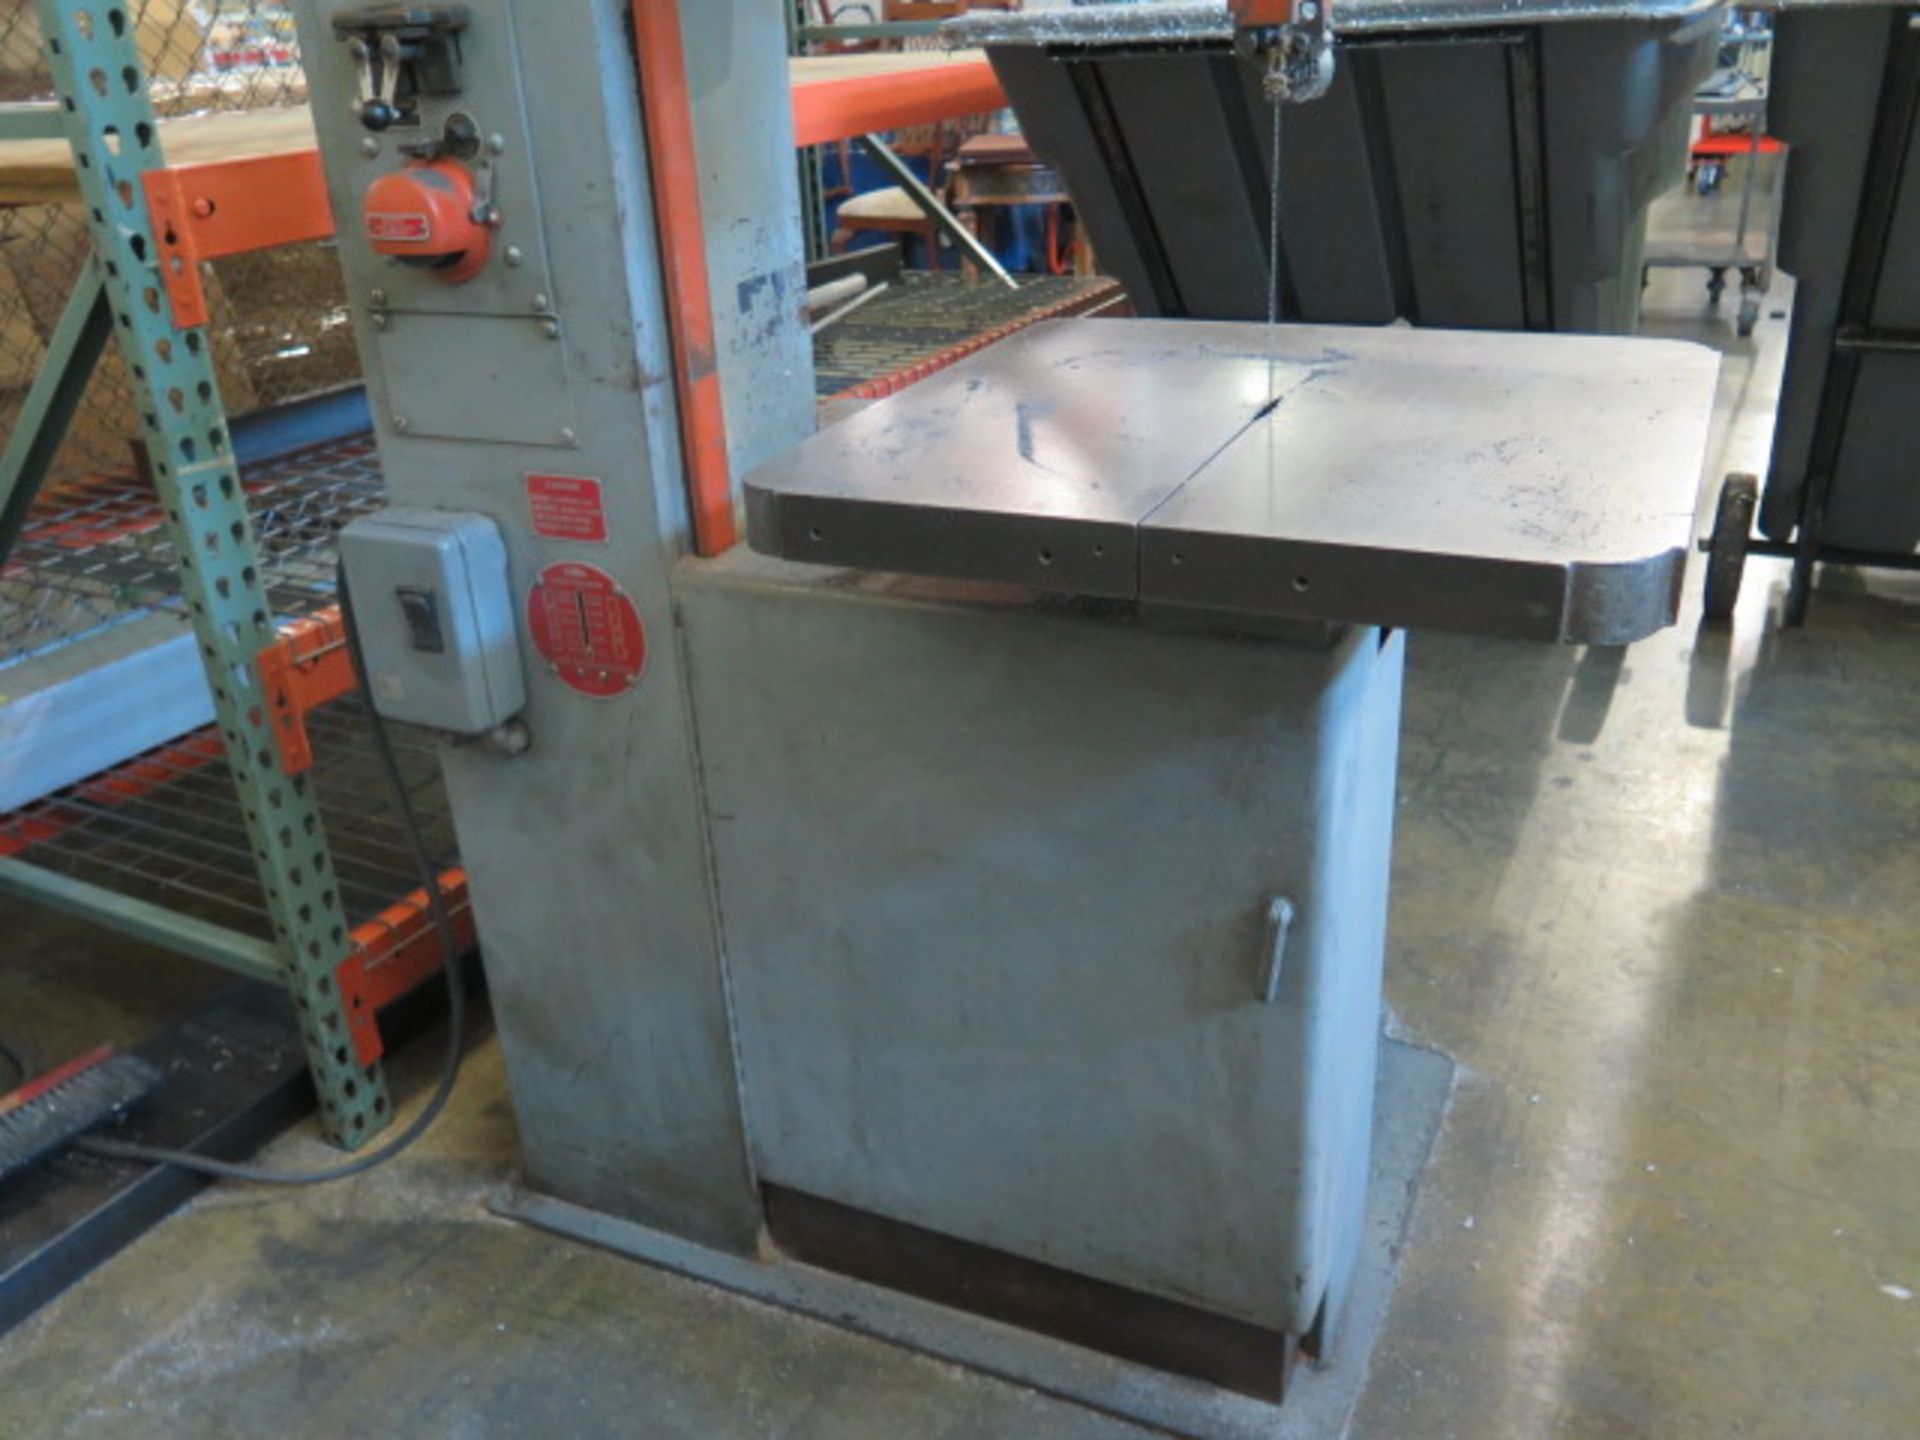 DoAll 2013-U 20” Vertical Band Saw s/n 411-81265 w/ Blade Welder, 24” x 24” Table (SOLD AS-IS - NO - Image 5 of 8